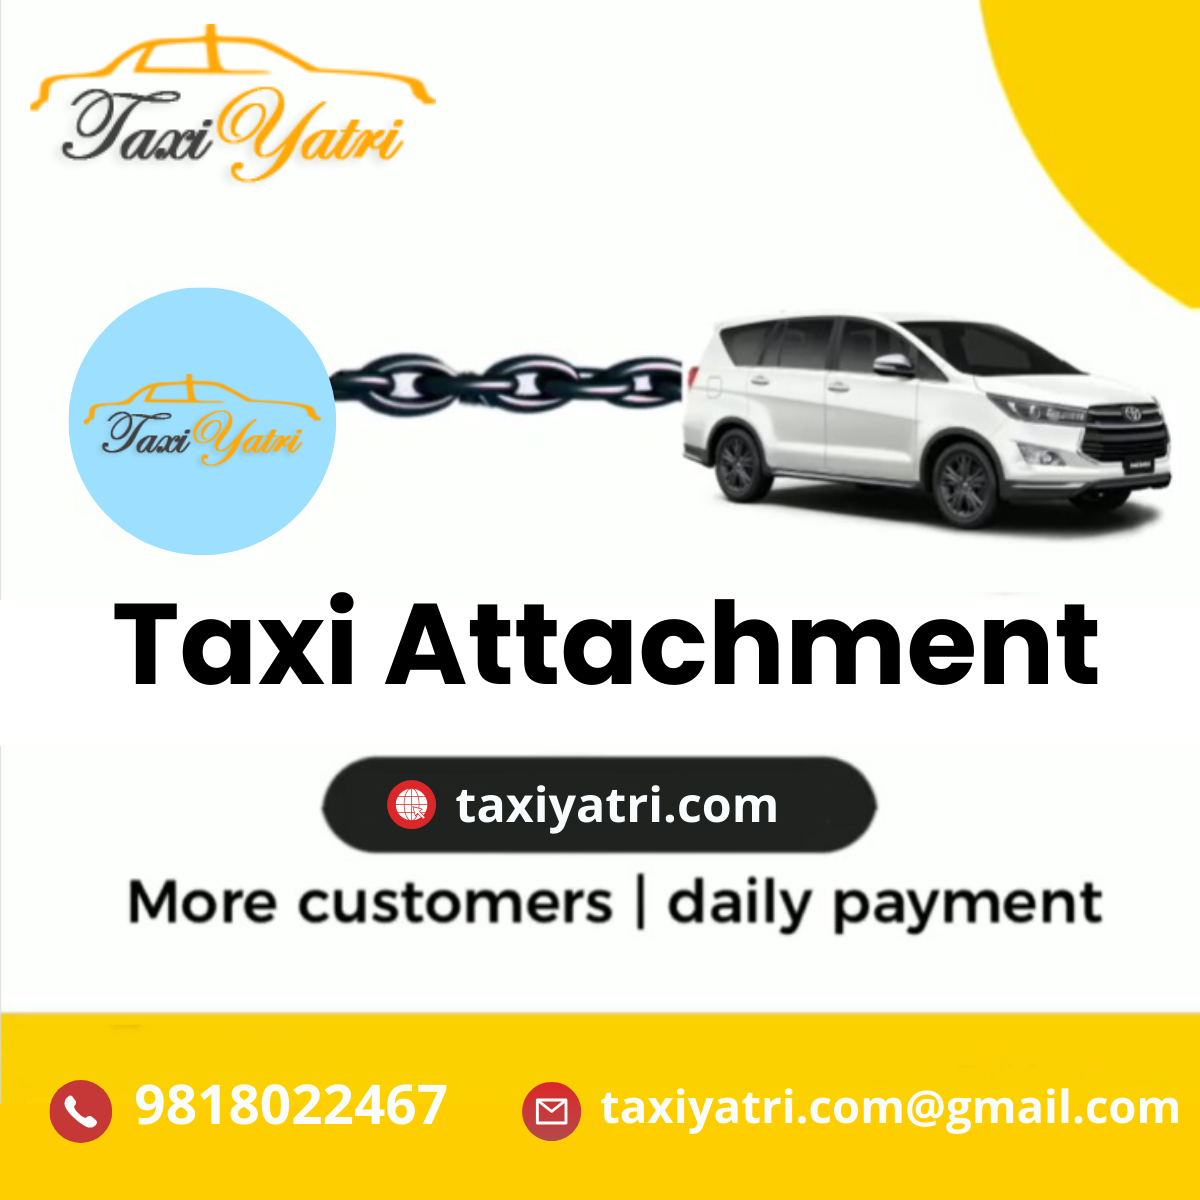 Travel Smarter, Not Harder: Taxi Attachments with TaxiYatri